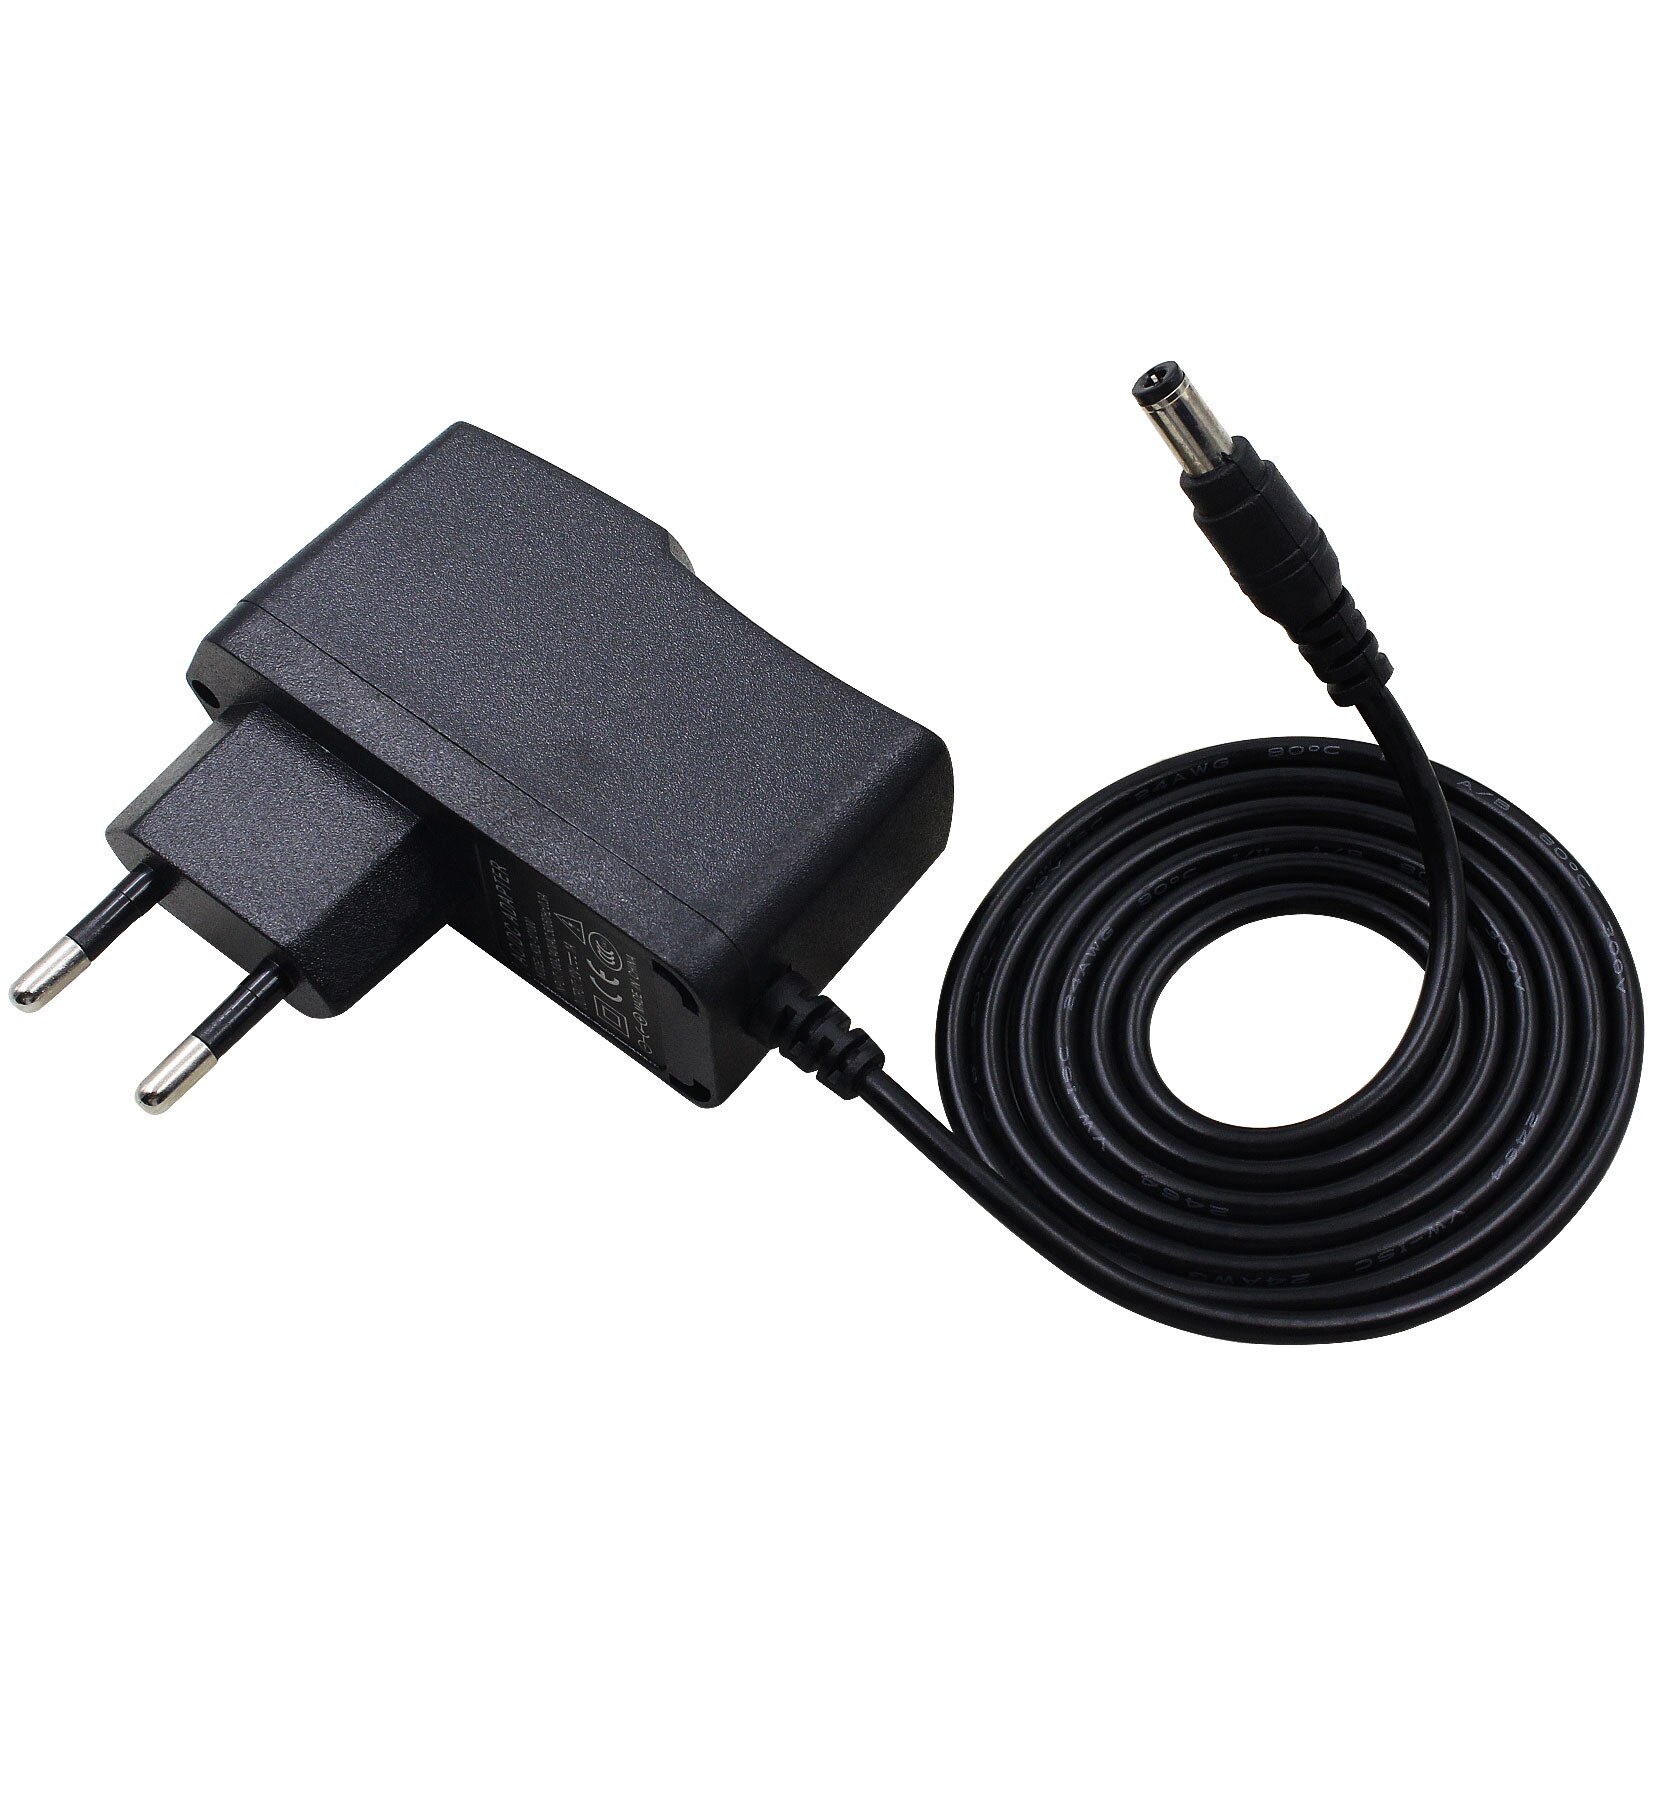 EU AC DC Power Charger Adapter voor Infomir SET-TOP BOX MAG254 MAG250 MAG254w1